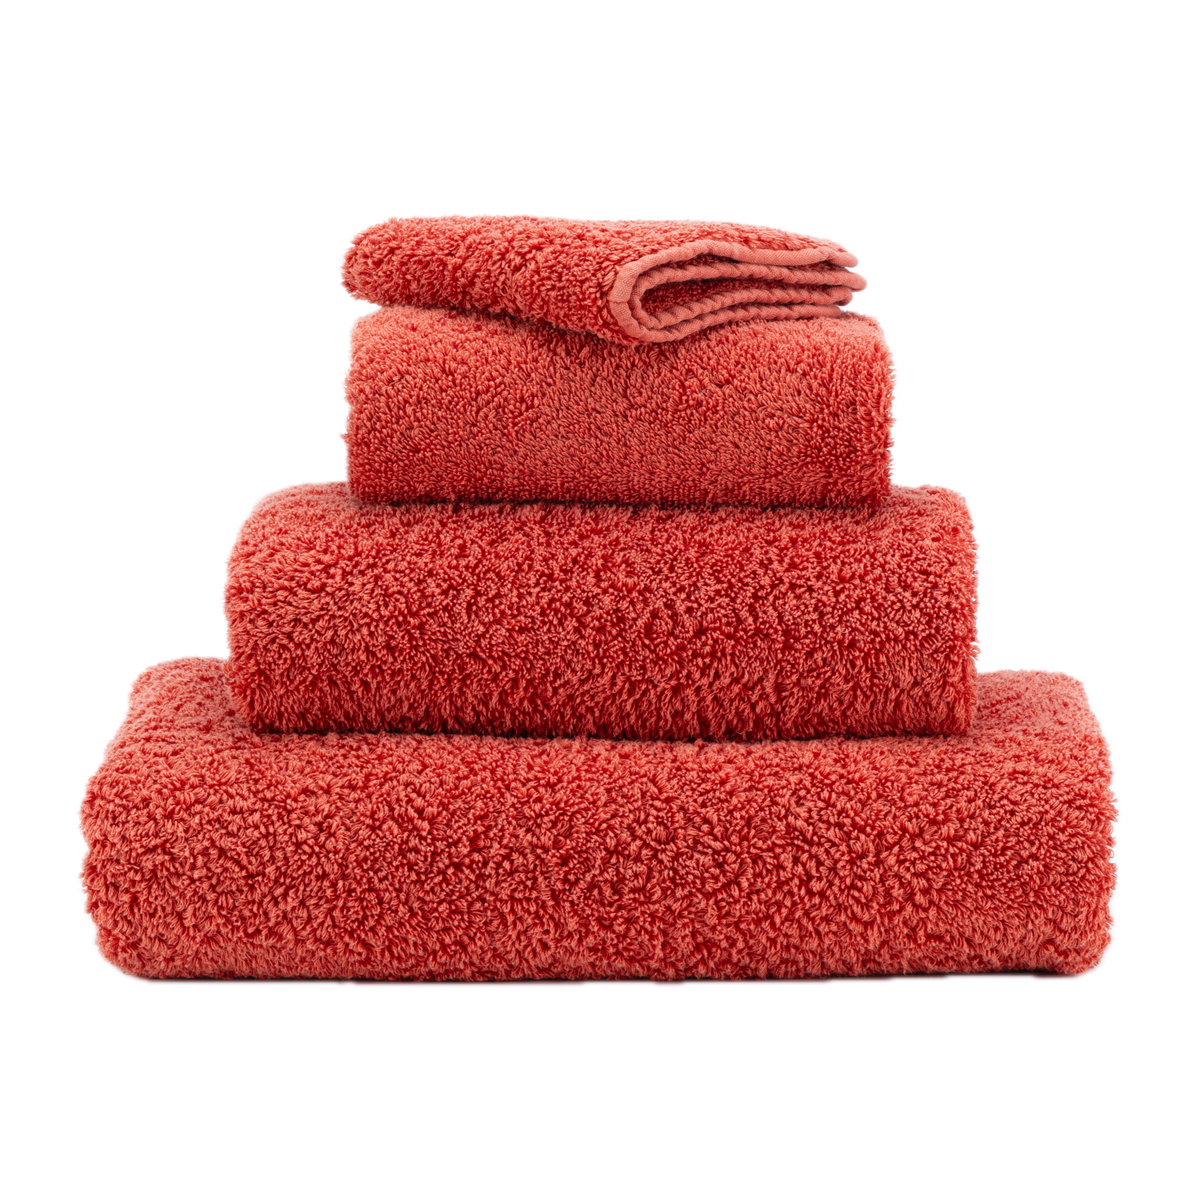 Stack of Abyss Super Pile Bath Towels in Chili Color